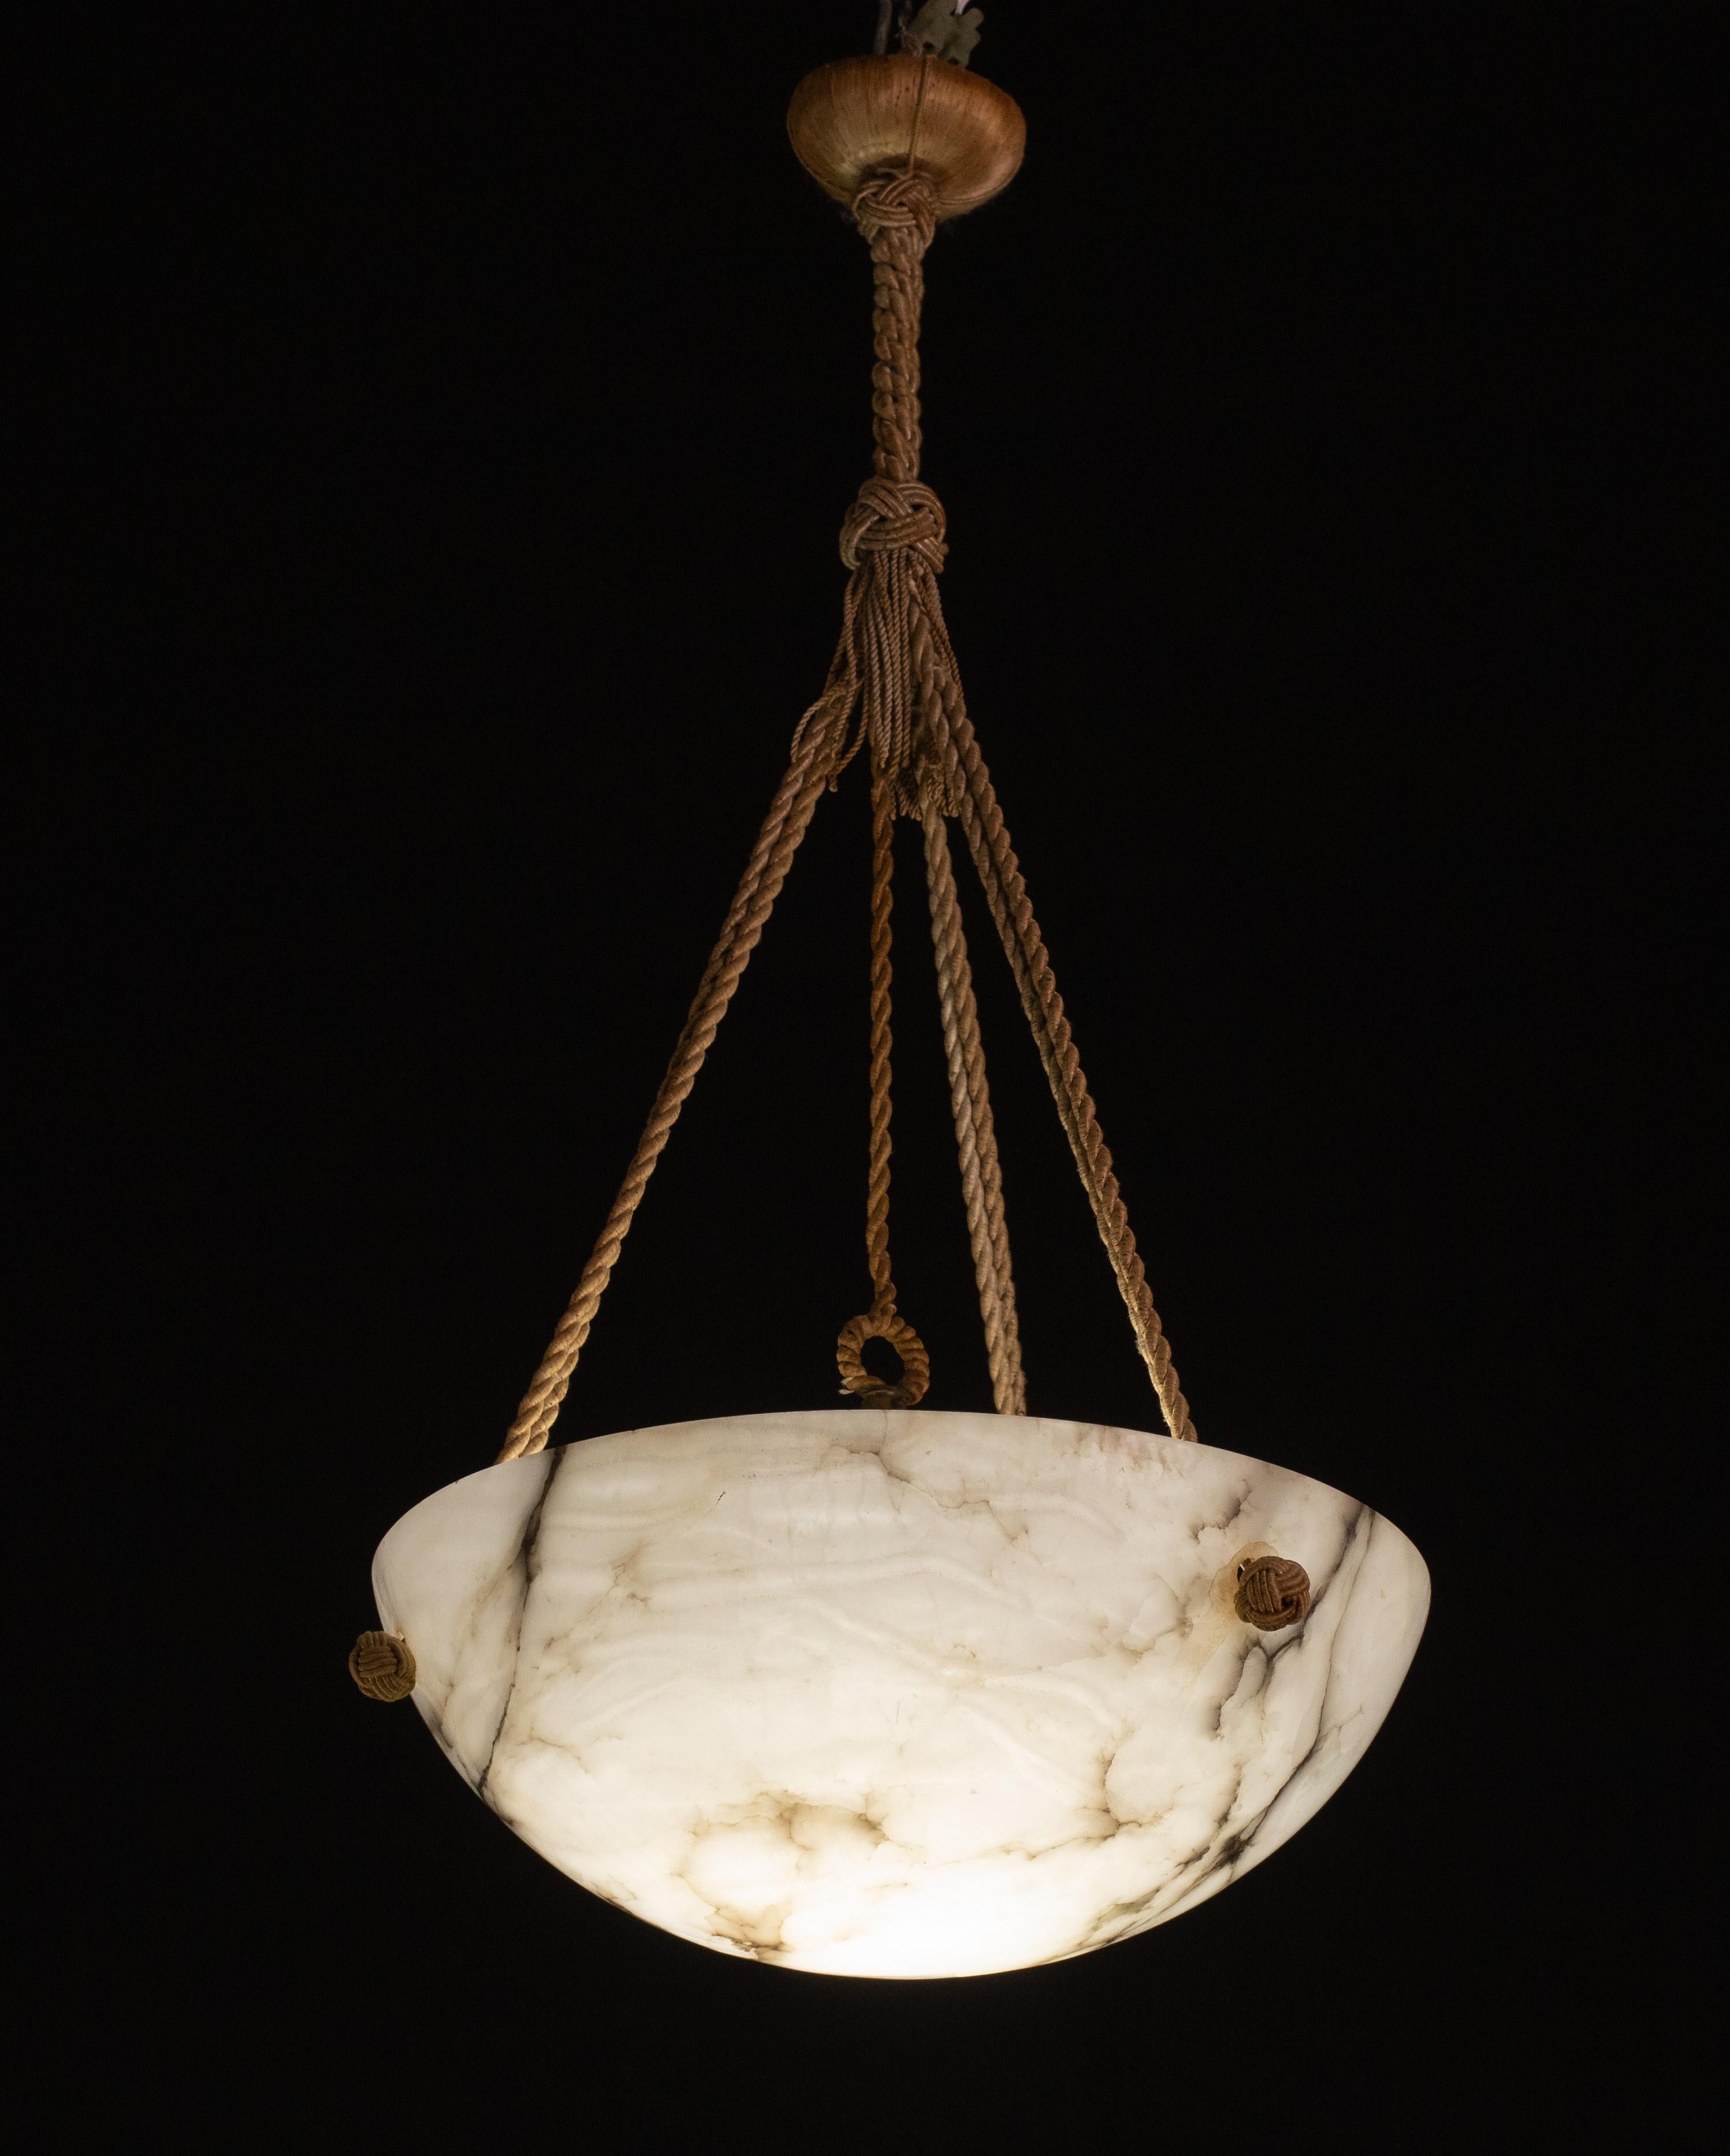 Antique alabaster hanging lamp in Art Deco style, circa 1940s.
A single piece of alabaster, beautifully worked with shades and reflections of other colours when lit, suspended from three strands of rope, its original, can be changed to three chains